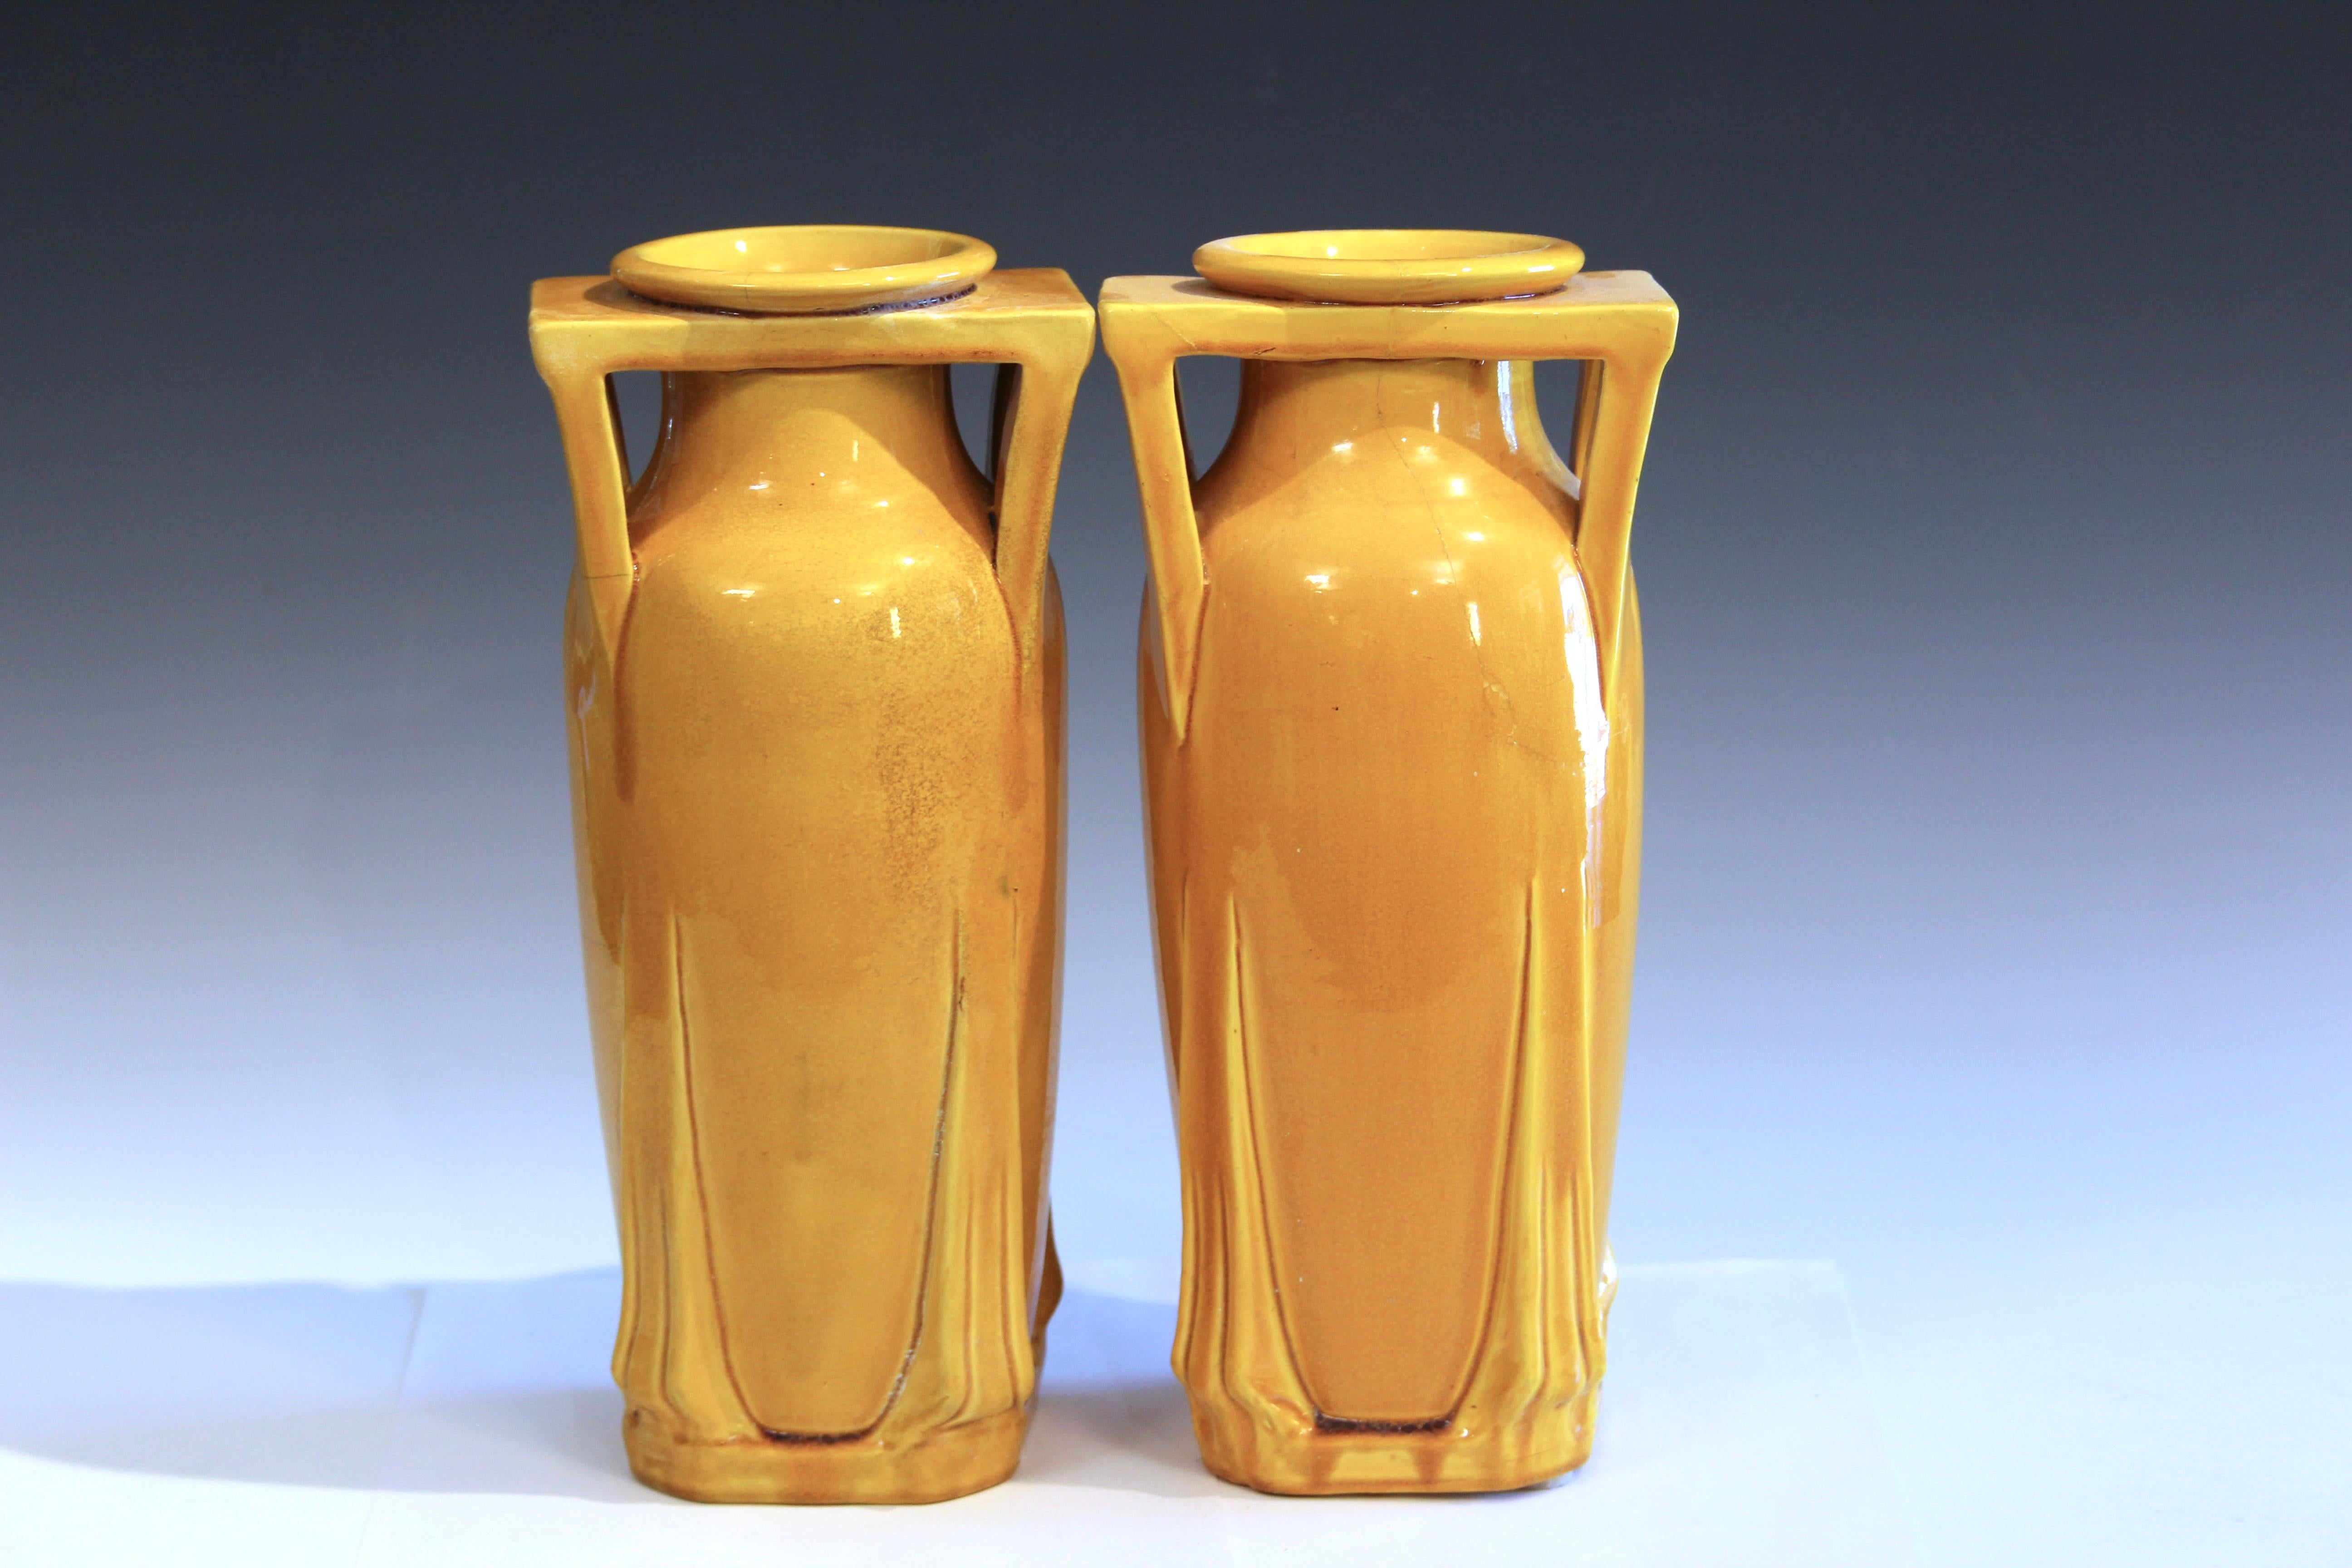 Pair antique Awaji pottery vases in buttress handled architectural form with yellow monochrome glaze. 12